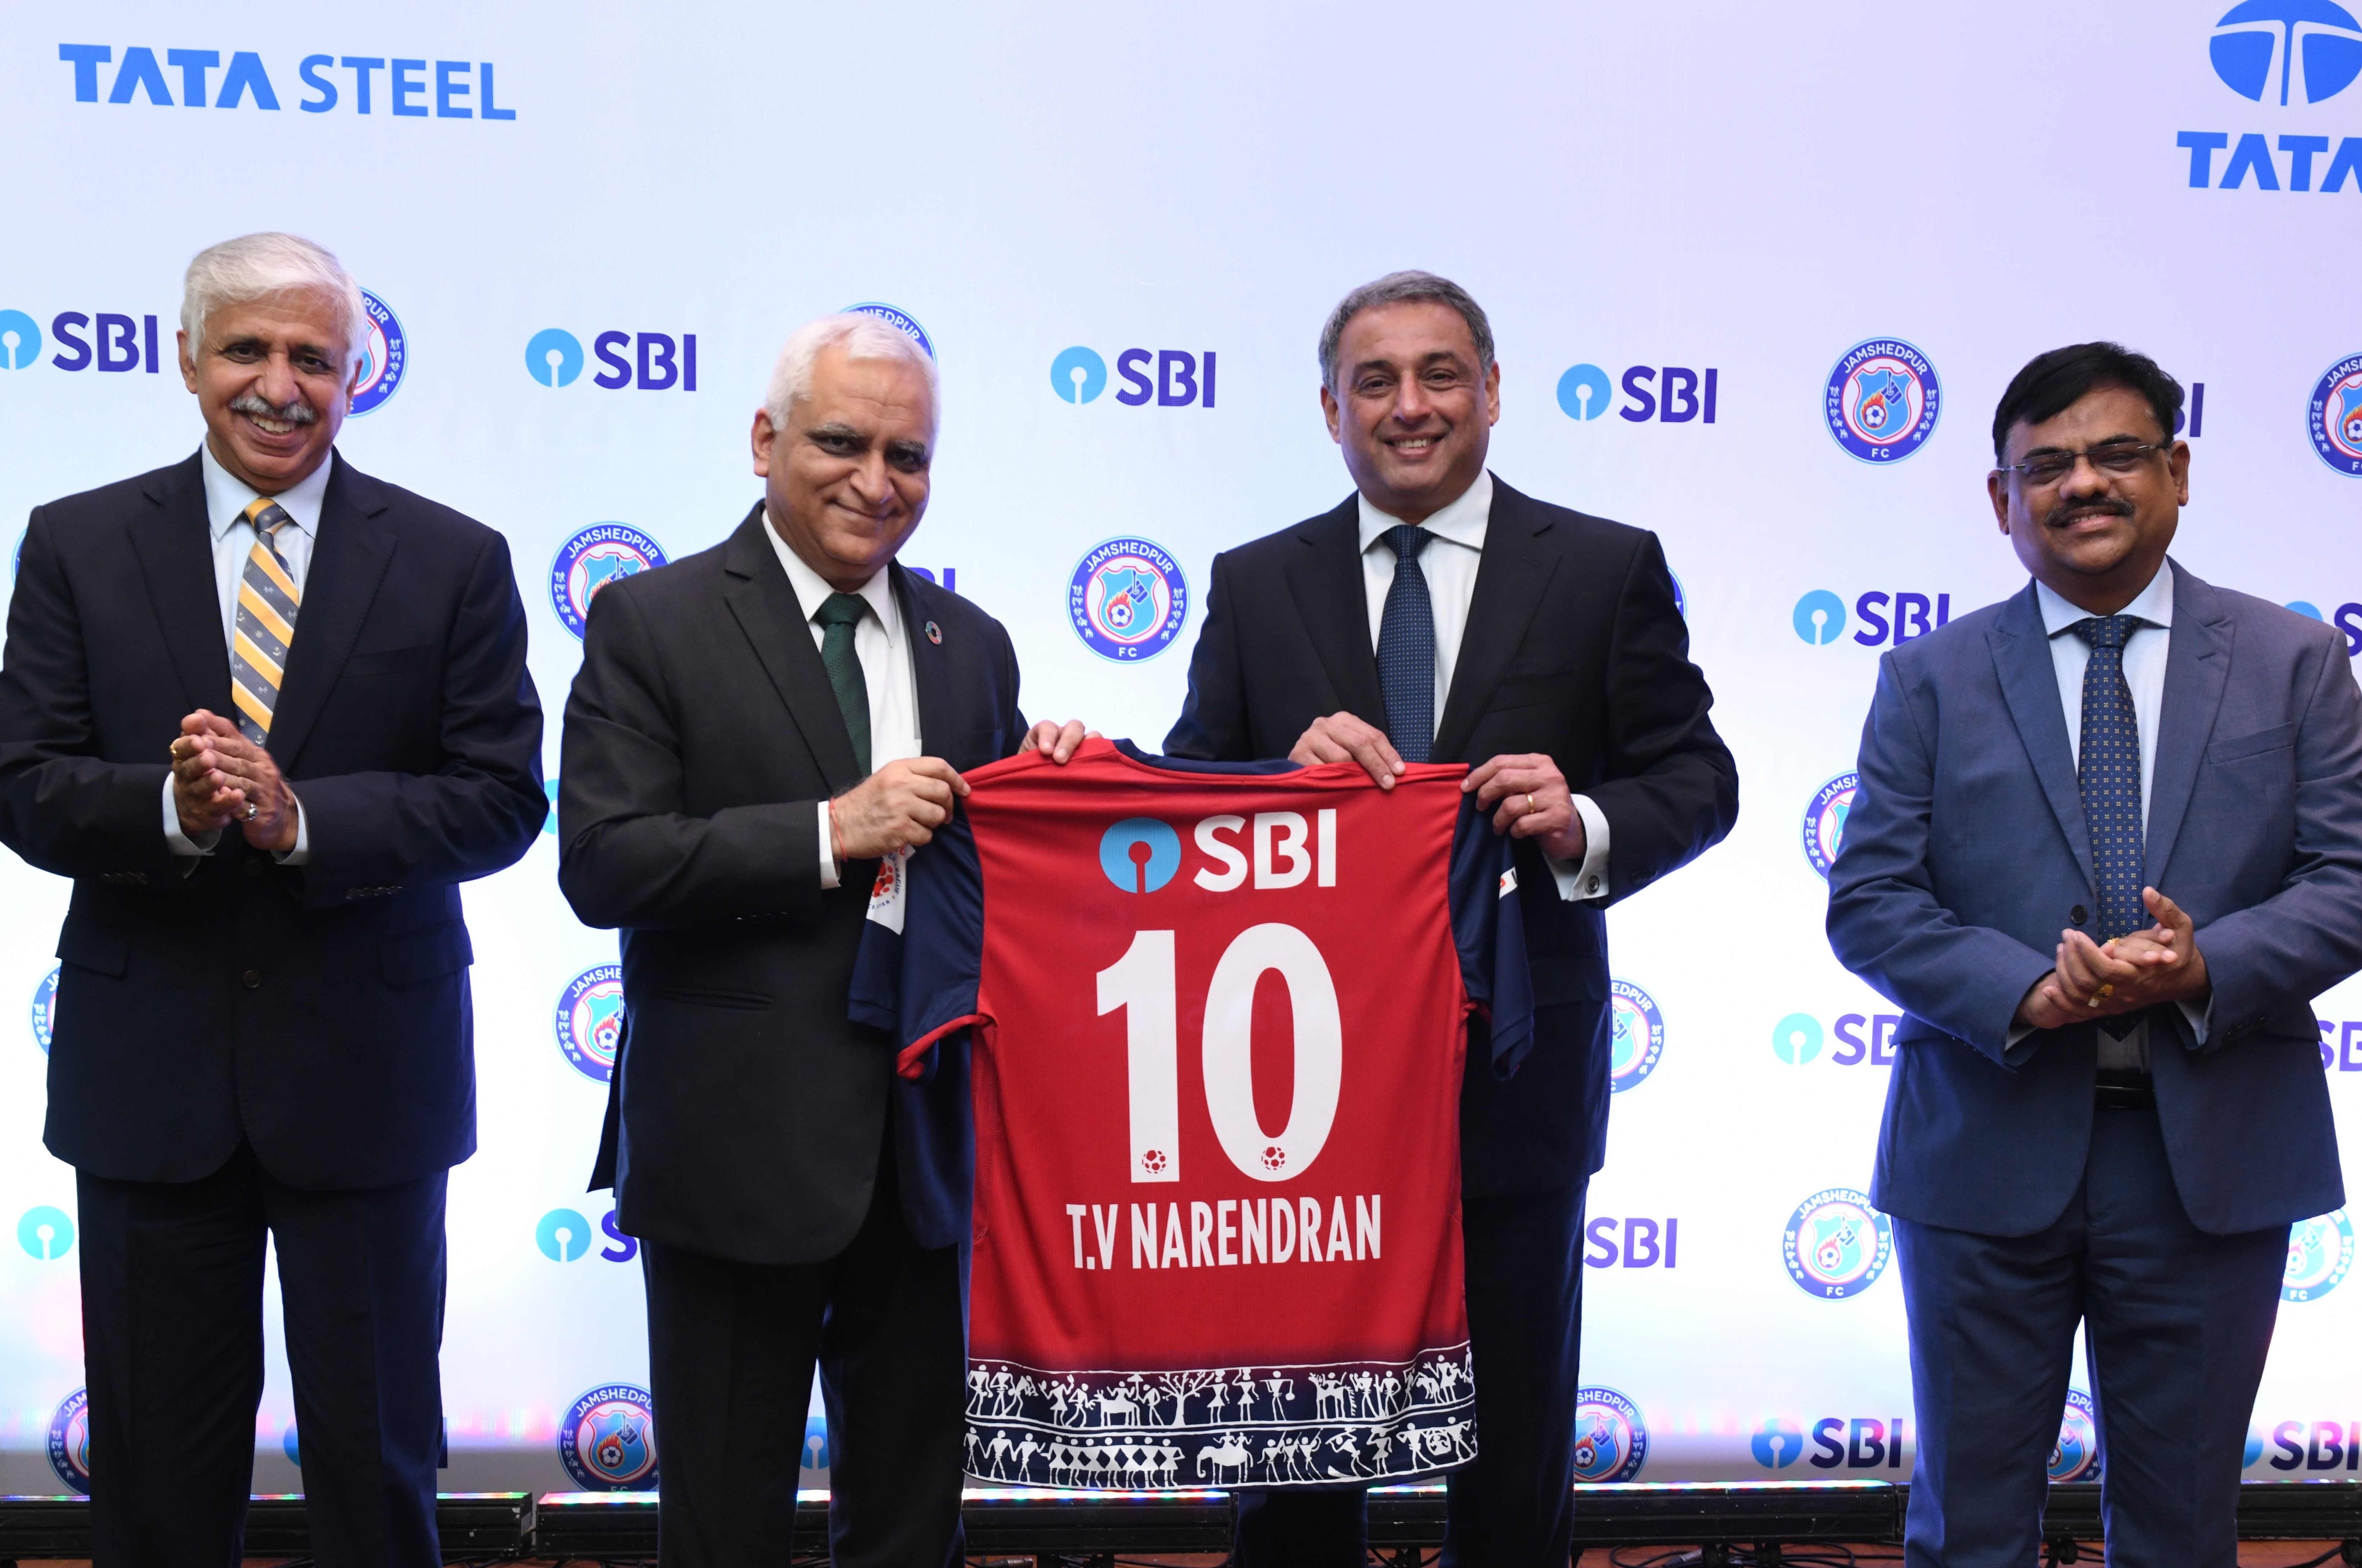 State Bank India (SBI) and Jamshedpur Football Club (JFC) enter into a partnership for promoting football in the country